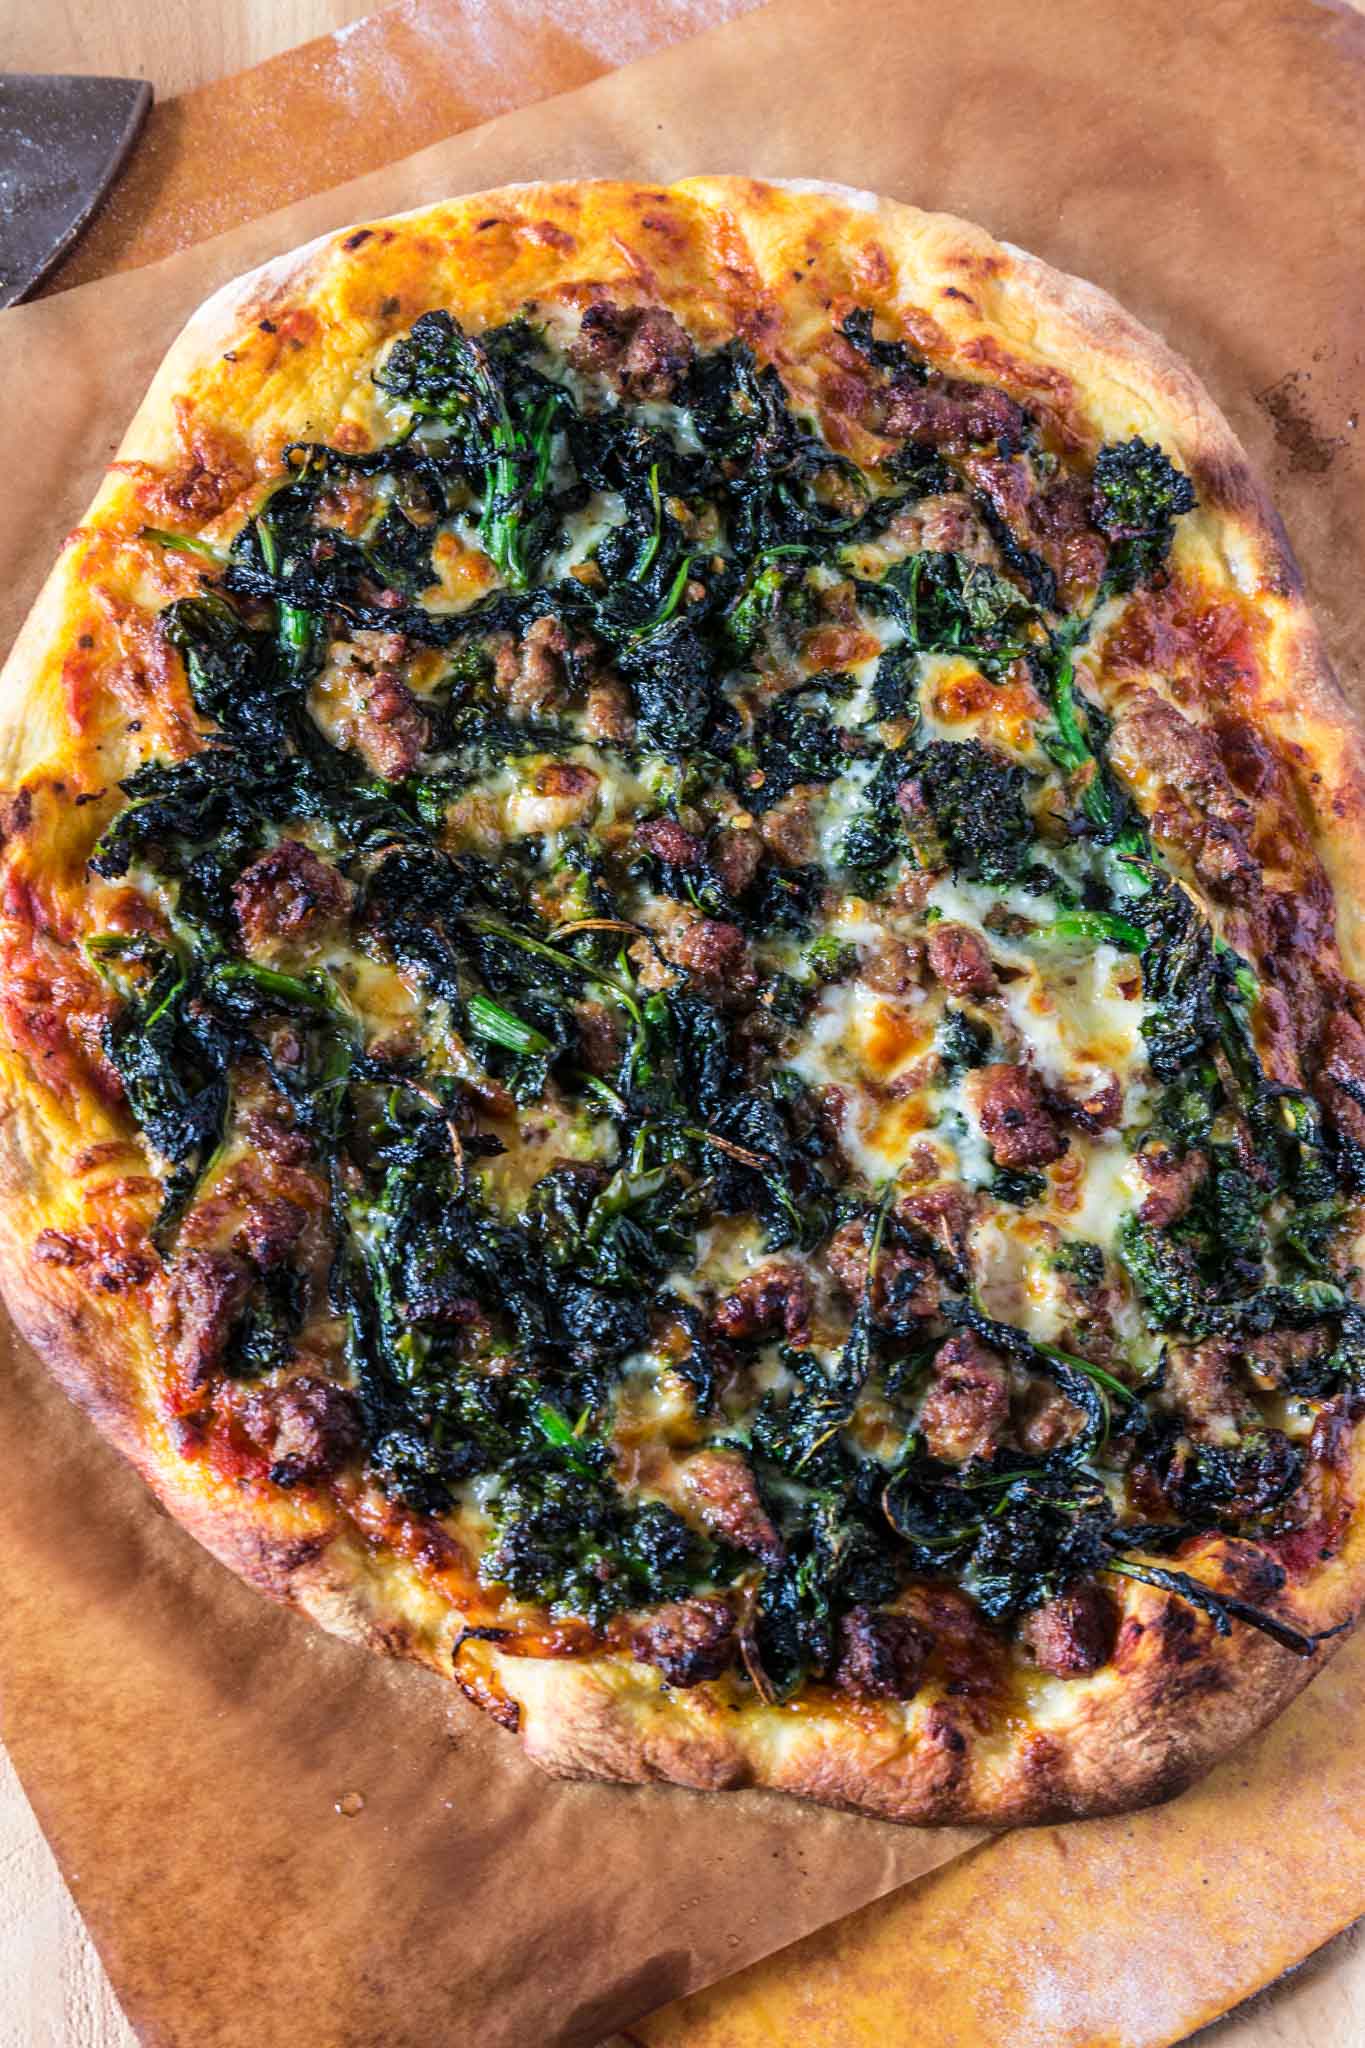 Turkey Sausage and Broccoli Rabe Pizza | www.oliviascuisine.com | This Turkey Sausage and Broccoli Rabe Pizza is one of the best pizzas you will ever taste. The slightly bitter and peppery broccoli rabe combined with the smokiness of the provolone cheese and the subtle sweetness from the turkey sausage create an explosion of flavor that will wow even those who turn their noses at broccoli rabe. You simply must try this! (Recipe by @oliviascuisine).